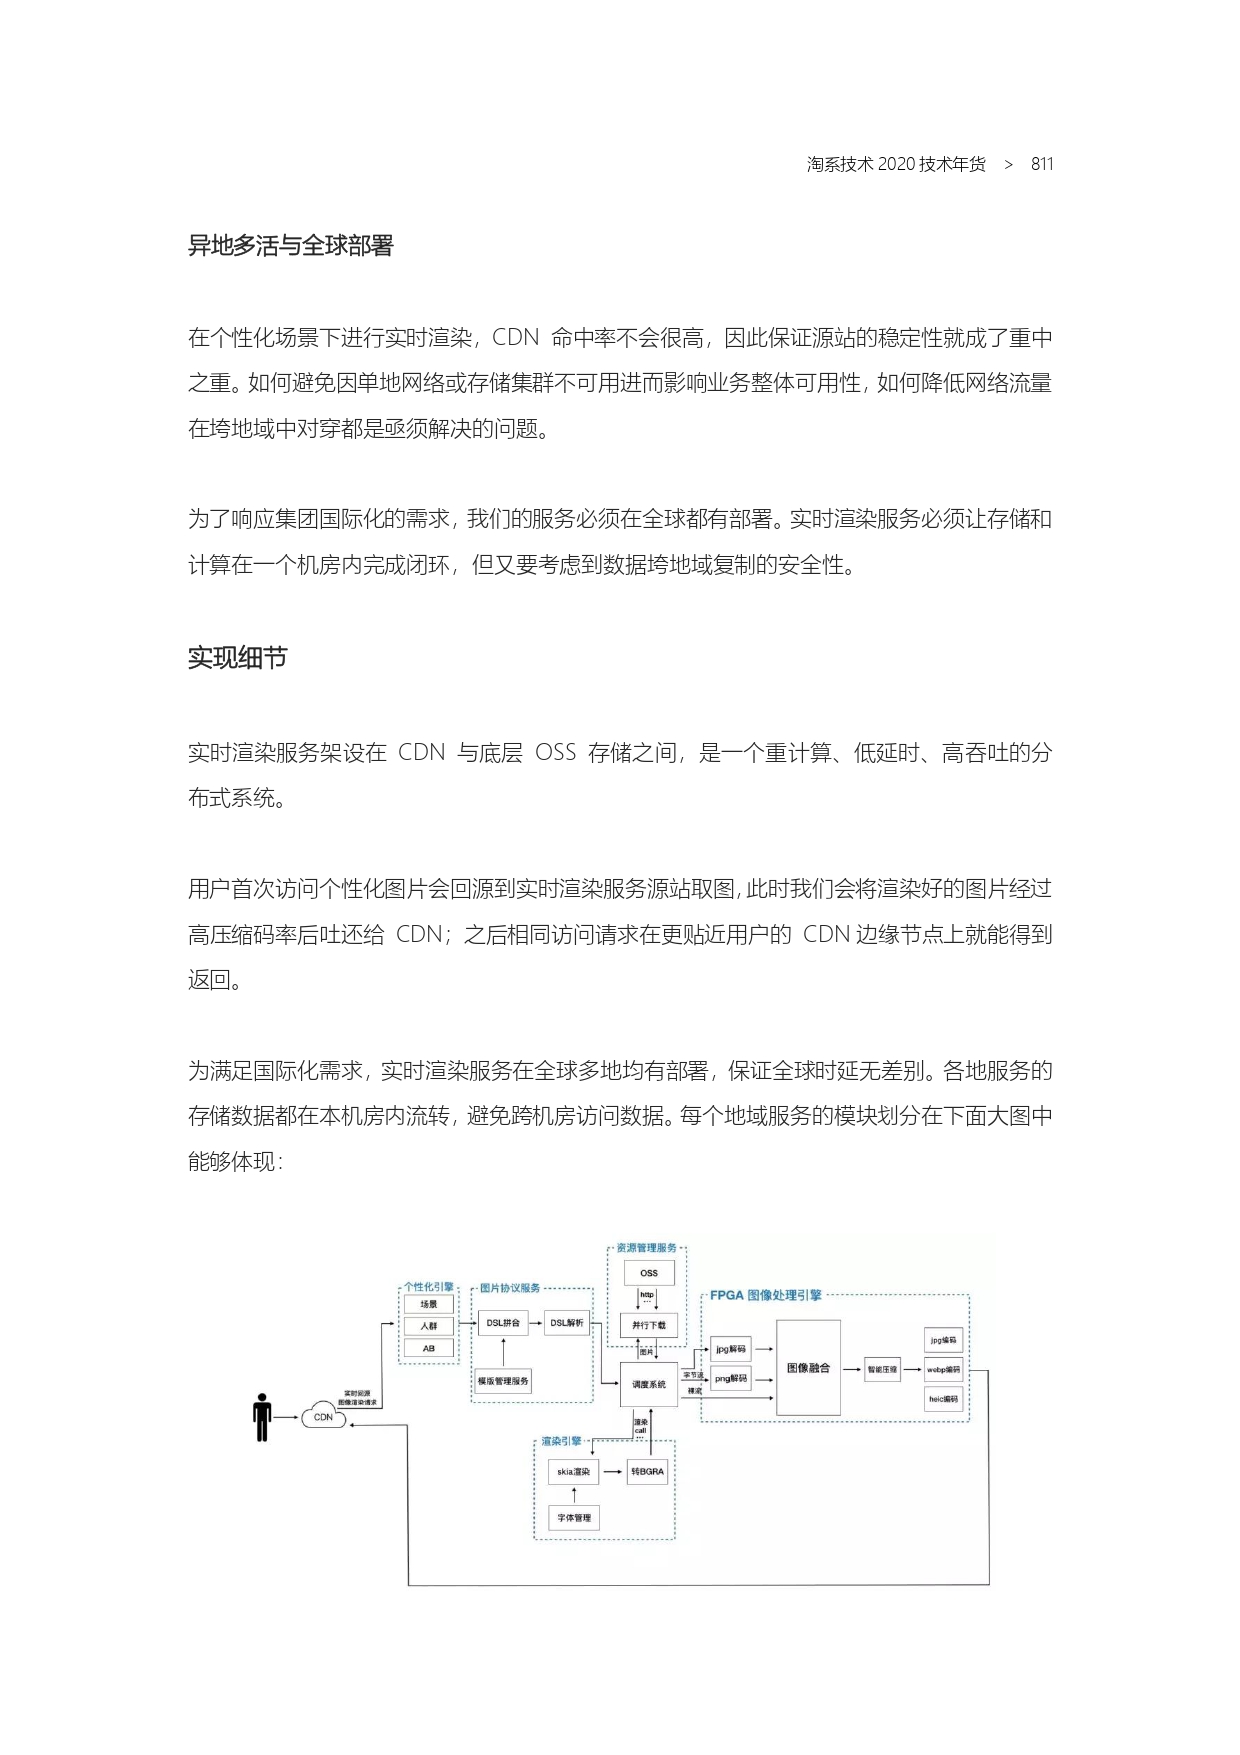 The Complete Works of Tao Technology 2020-571-1189-1-300_page-0241.jpg